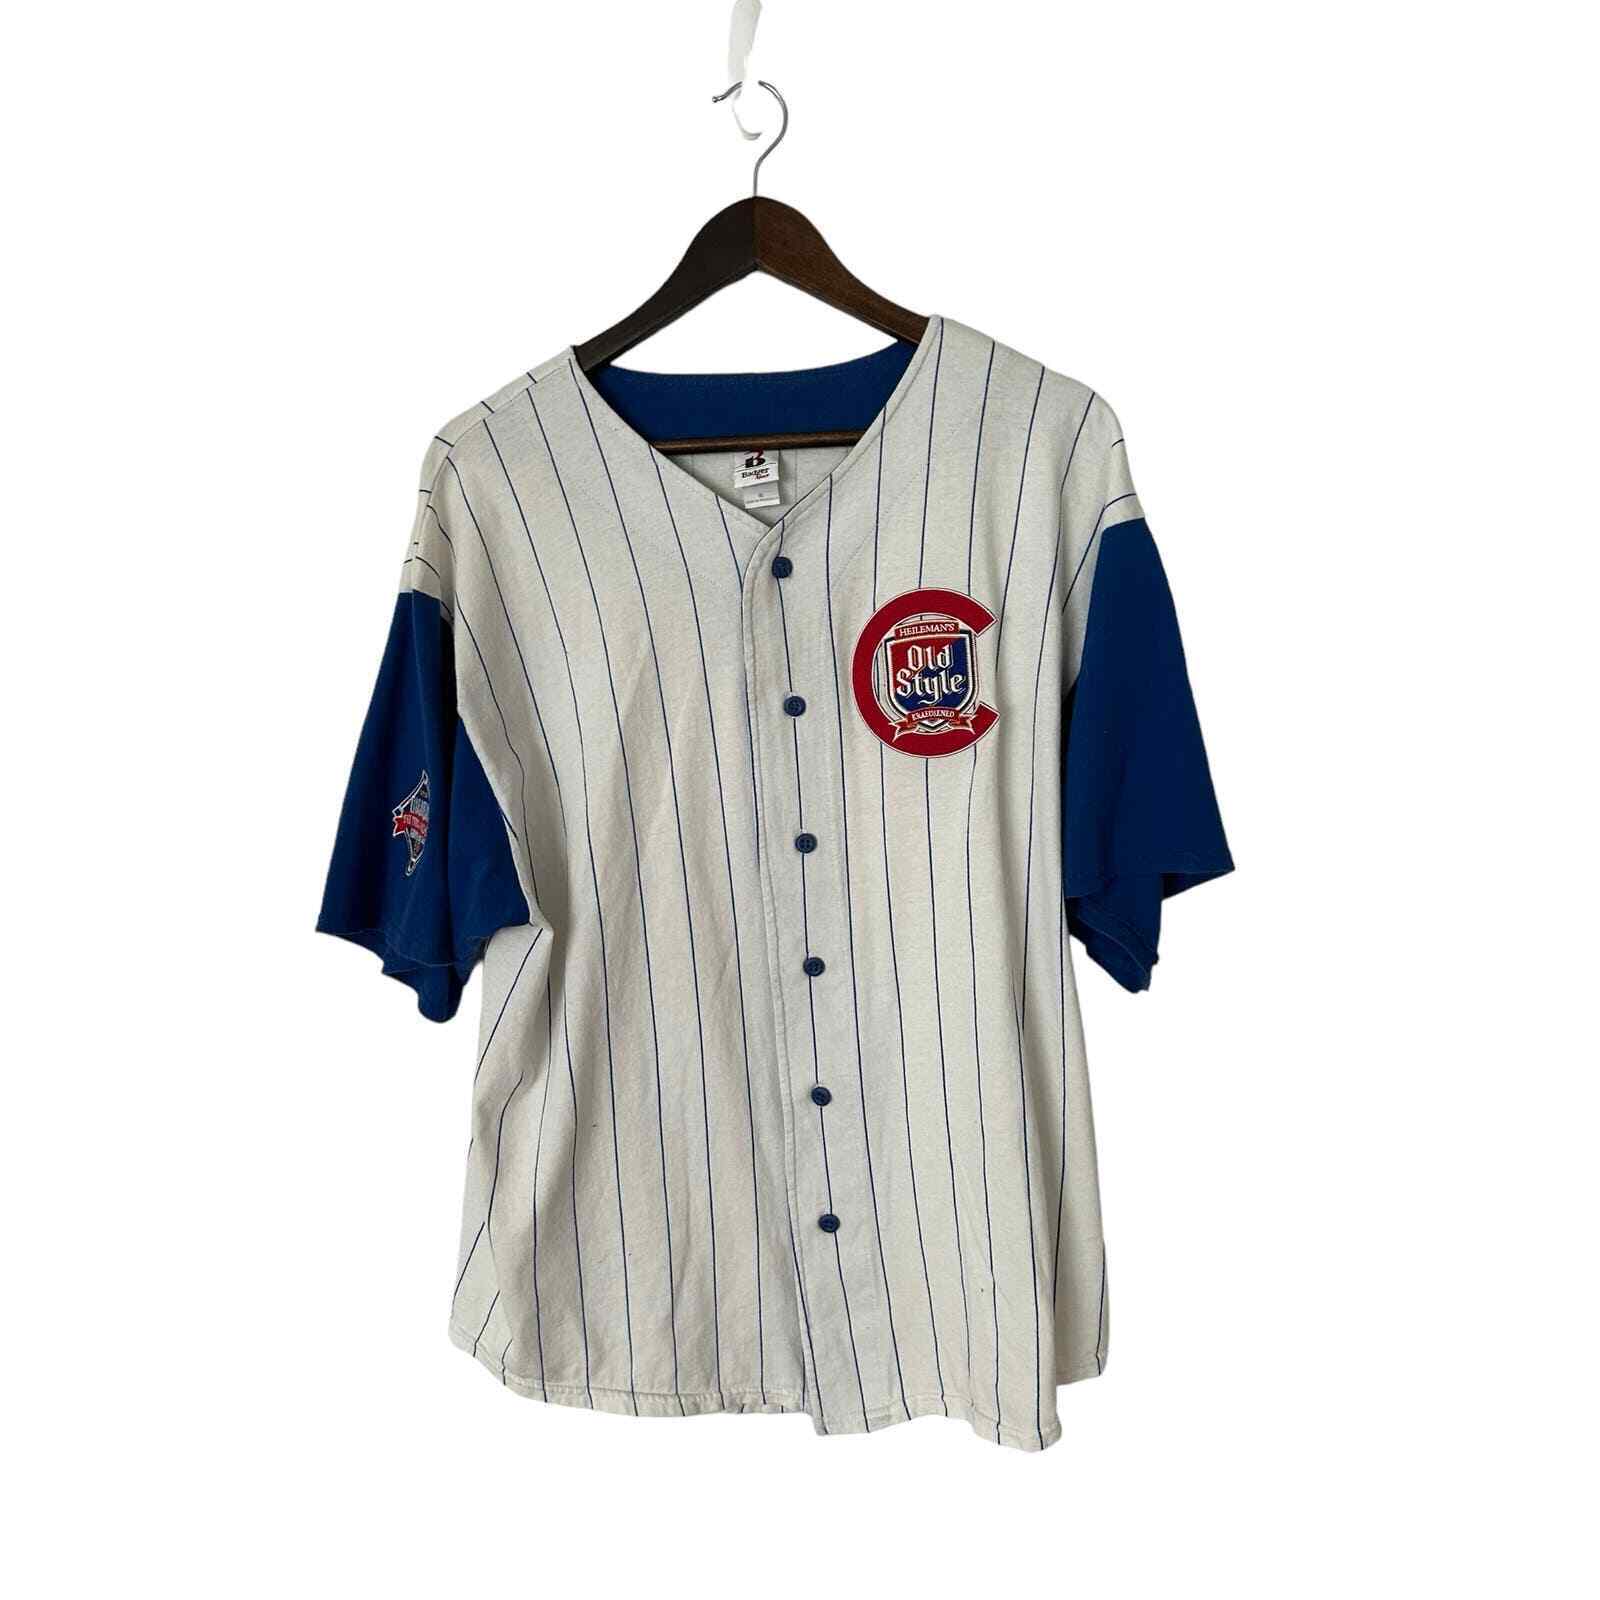 Chicago Cubs Heileman\'s Old Style 10 Jersey shirt size XL